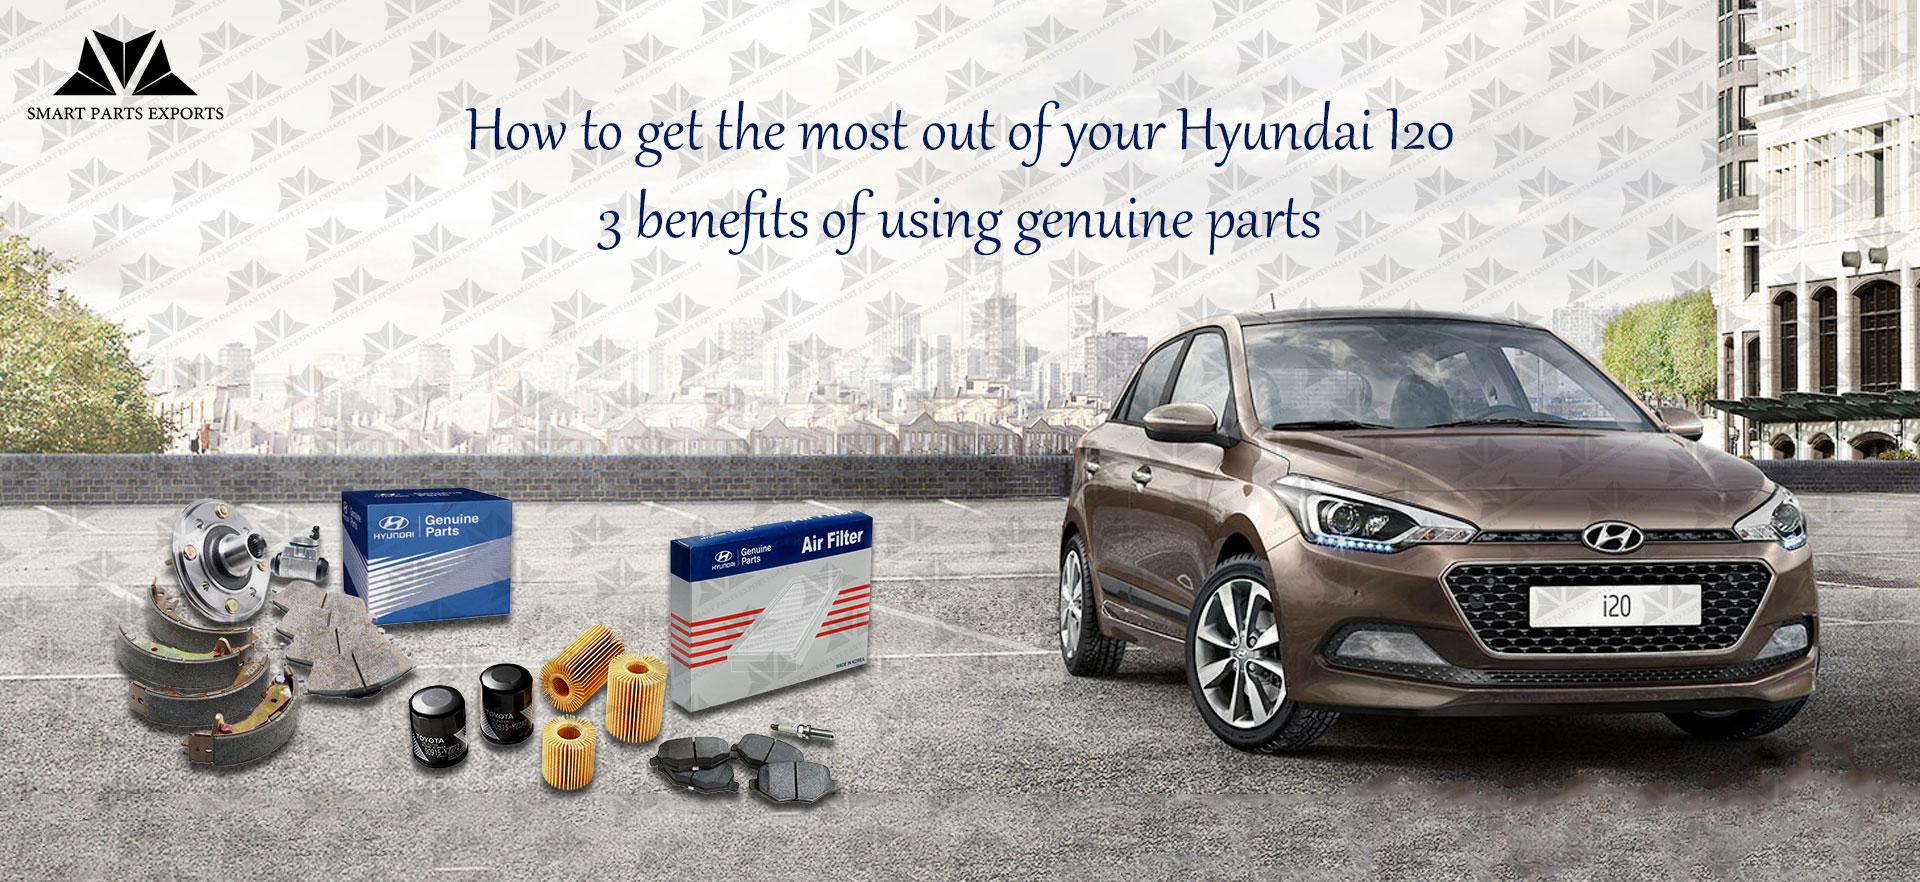 How to get the most out of your Hyundai I20: 3 benefits of using genuine parts